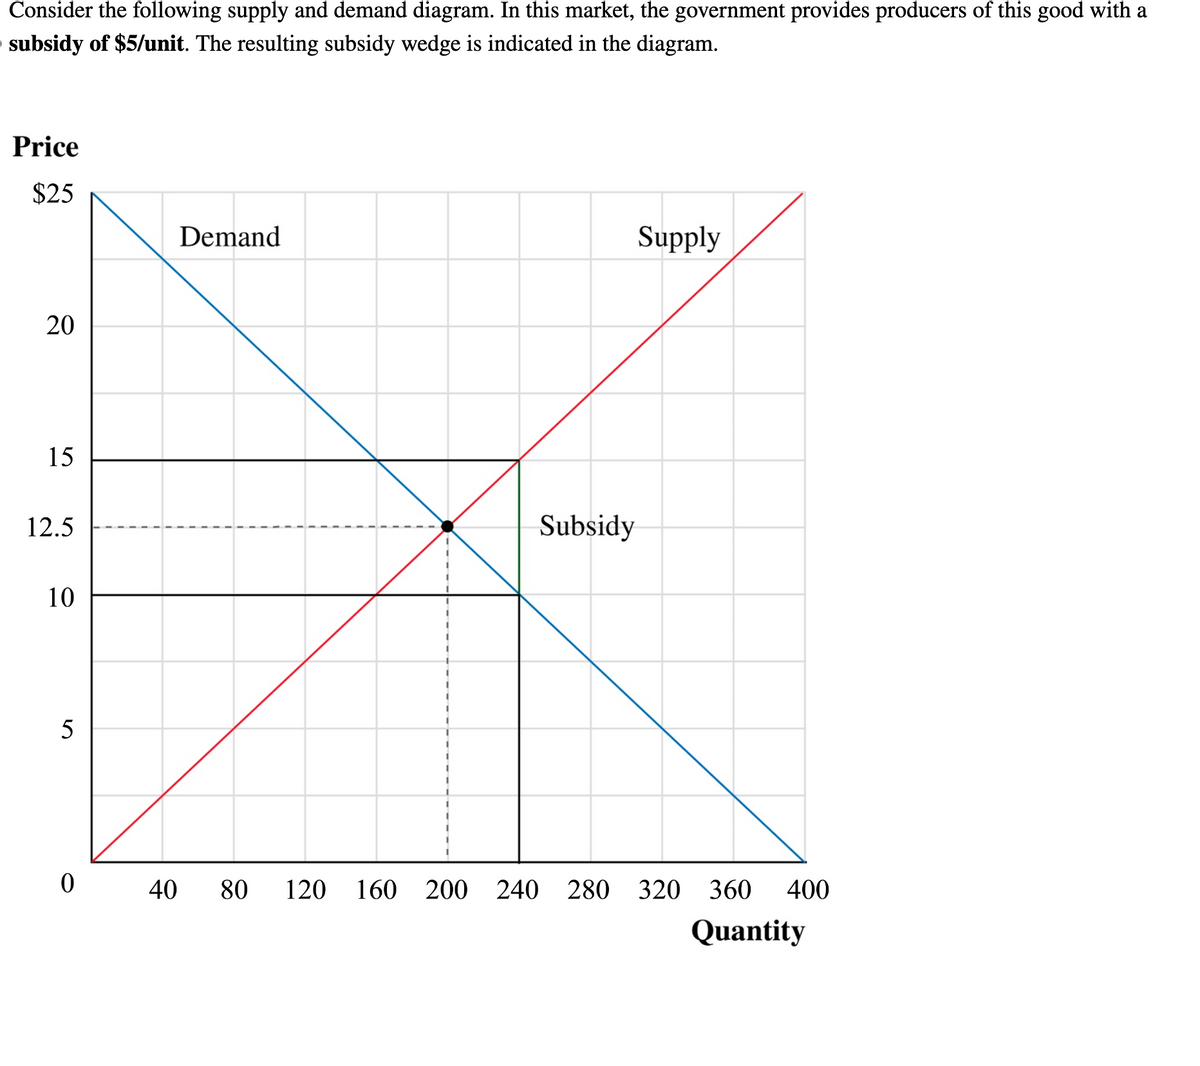 Consider the following supply and demand diagram. In this market, the government provides producers of this good with a
subsidy of $5/unit. The resulting subsidy wedge is indicated in the diagram.
Price
$25
20
15
12.5
10
150
0
Demand
Supply
Subsidy
40 80 120 160 200 240 280 320 360 400
Quantity